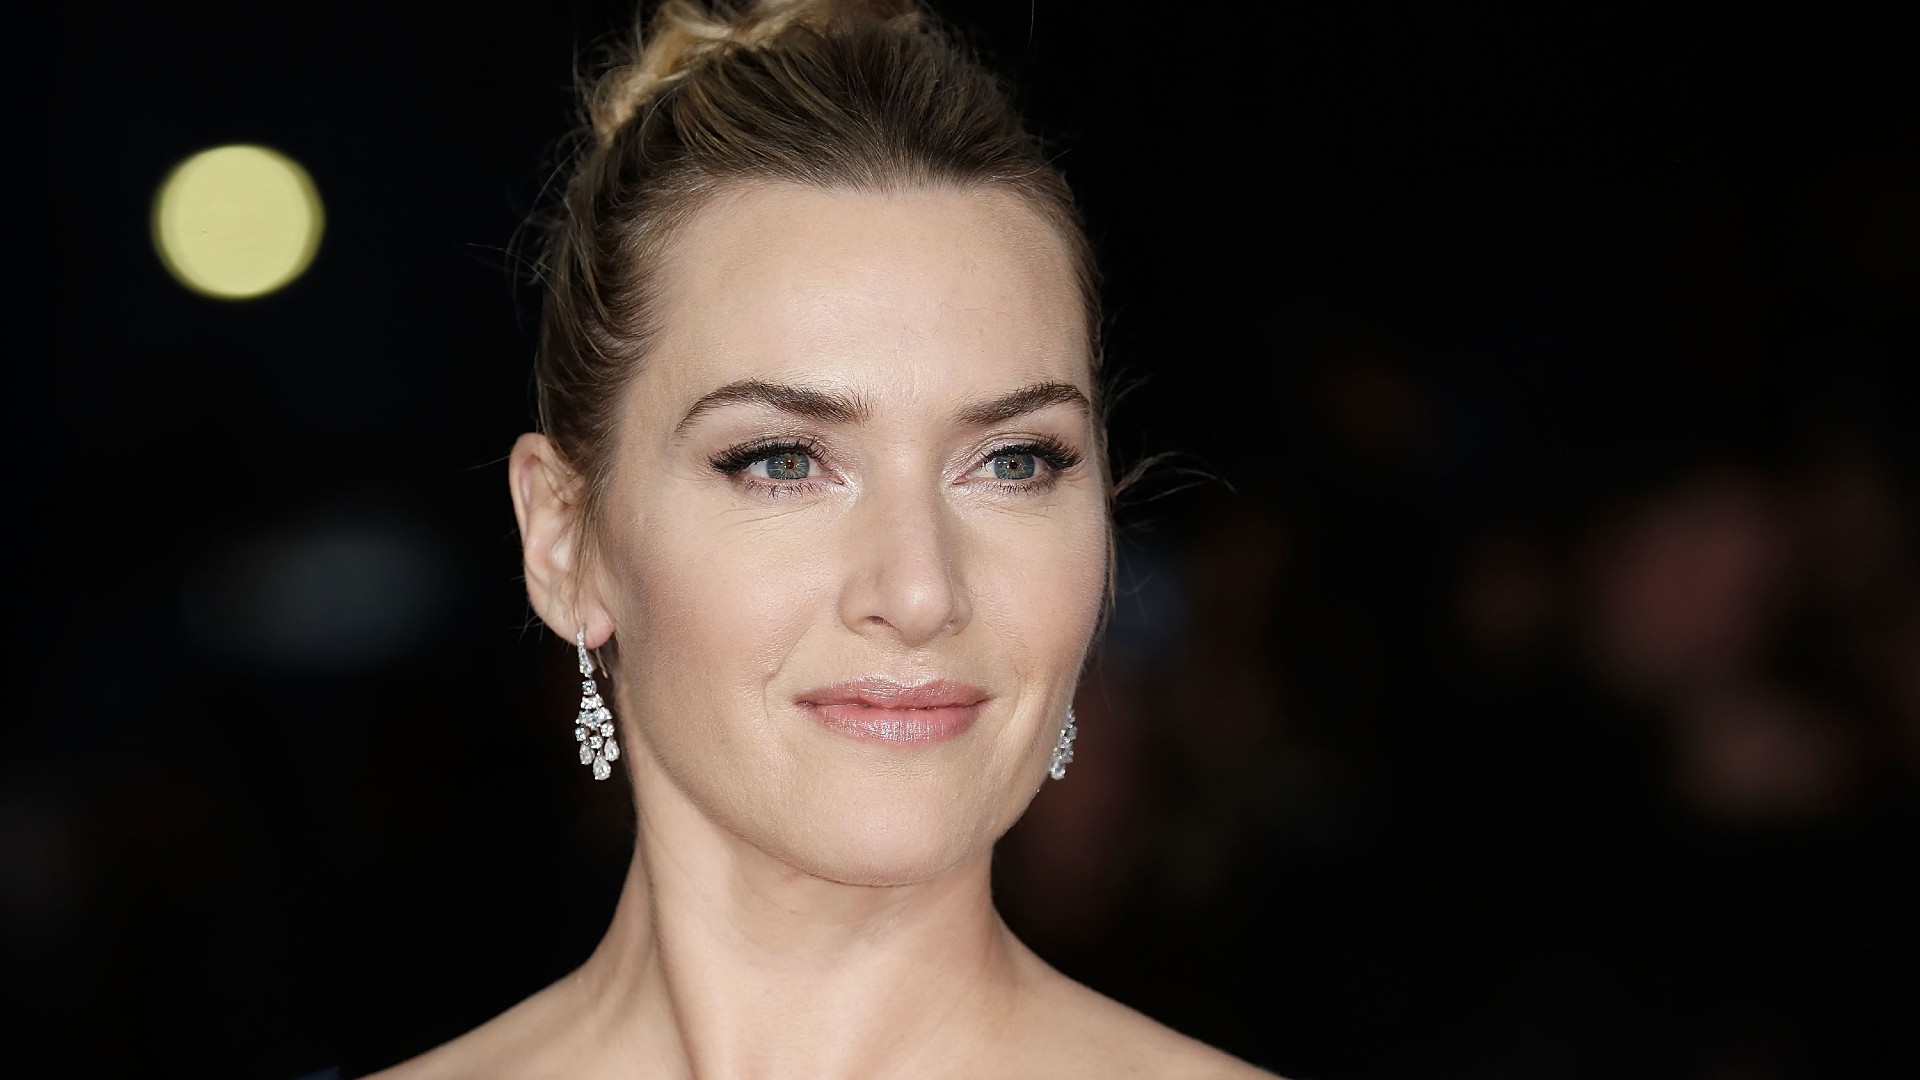 First Look: Kate Winslet and Daughter Mia Threapleton Star in Mental Health Drama 'I Am Ruth'